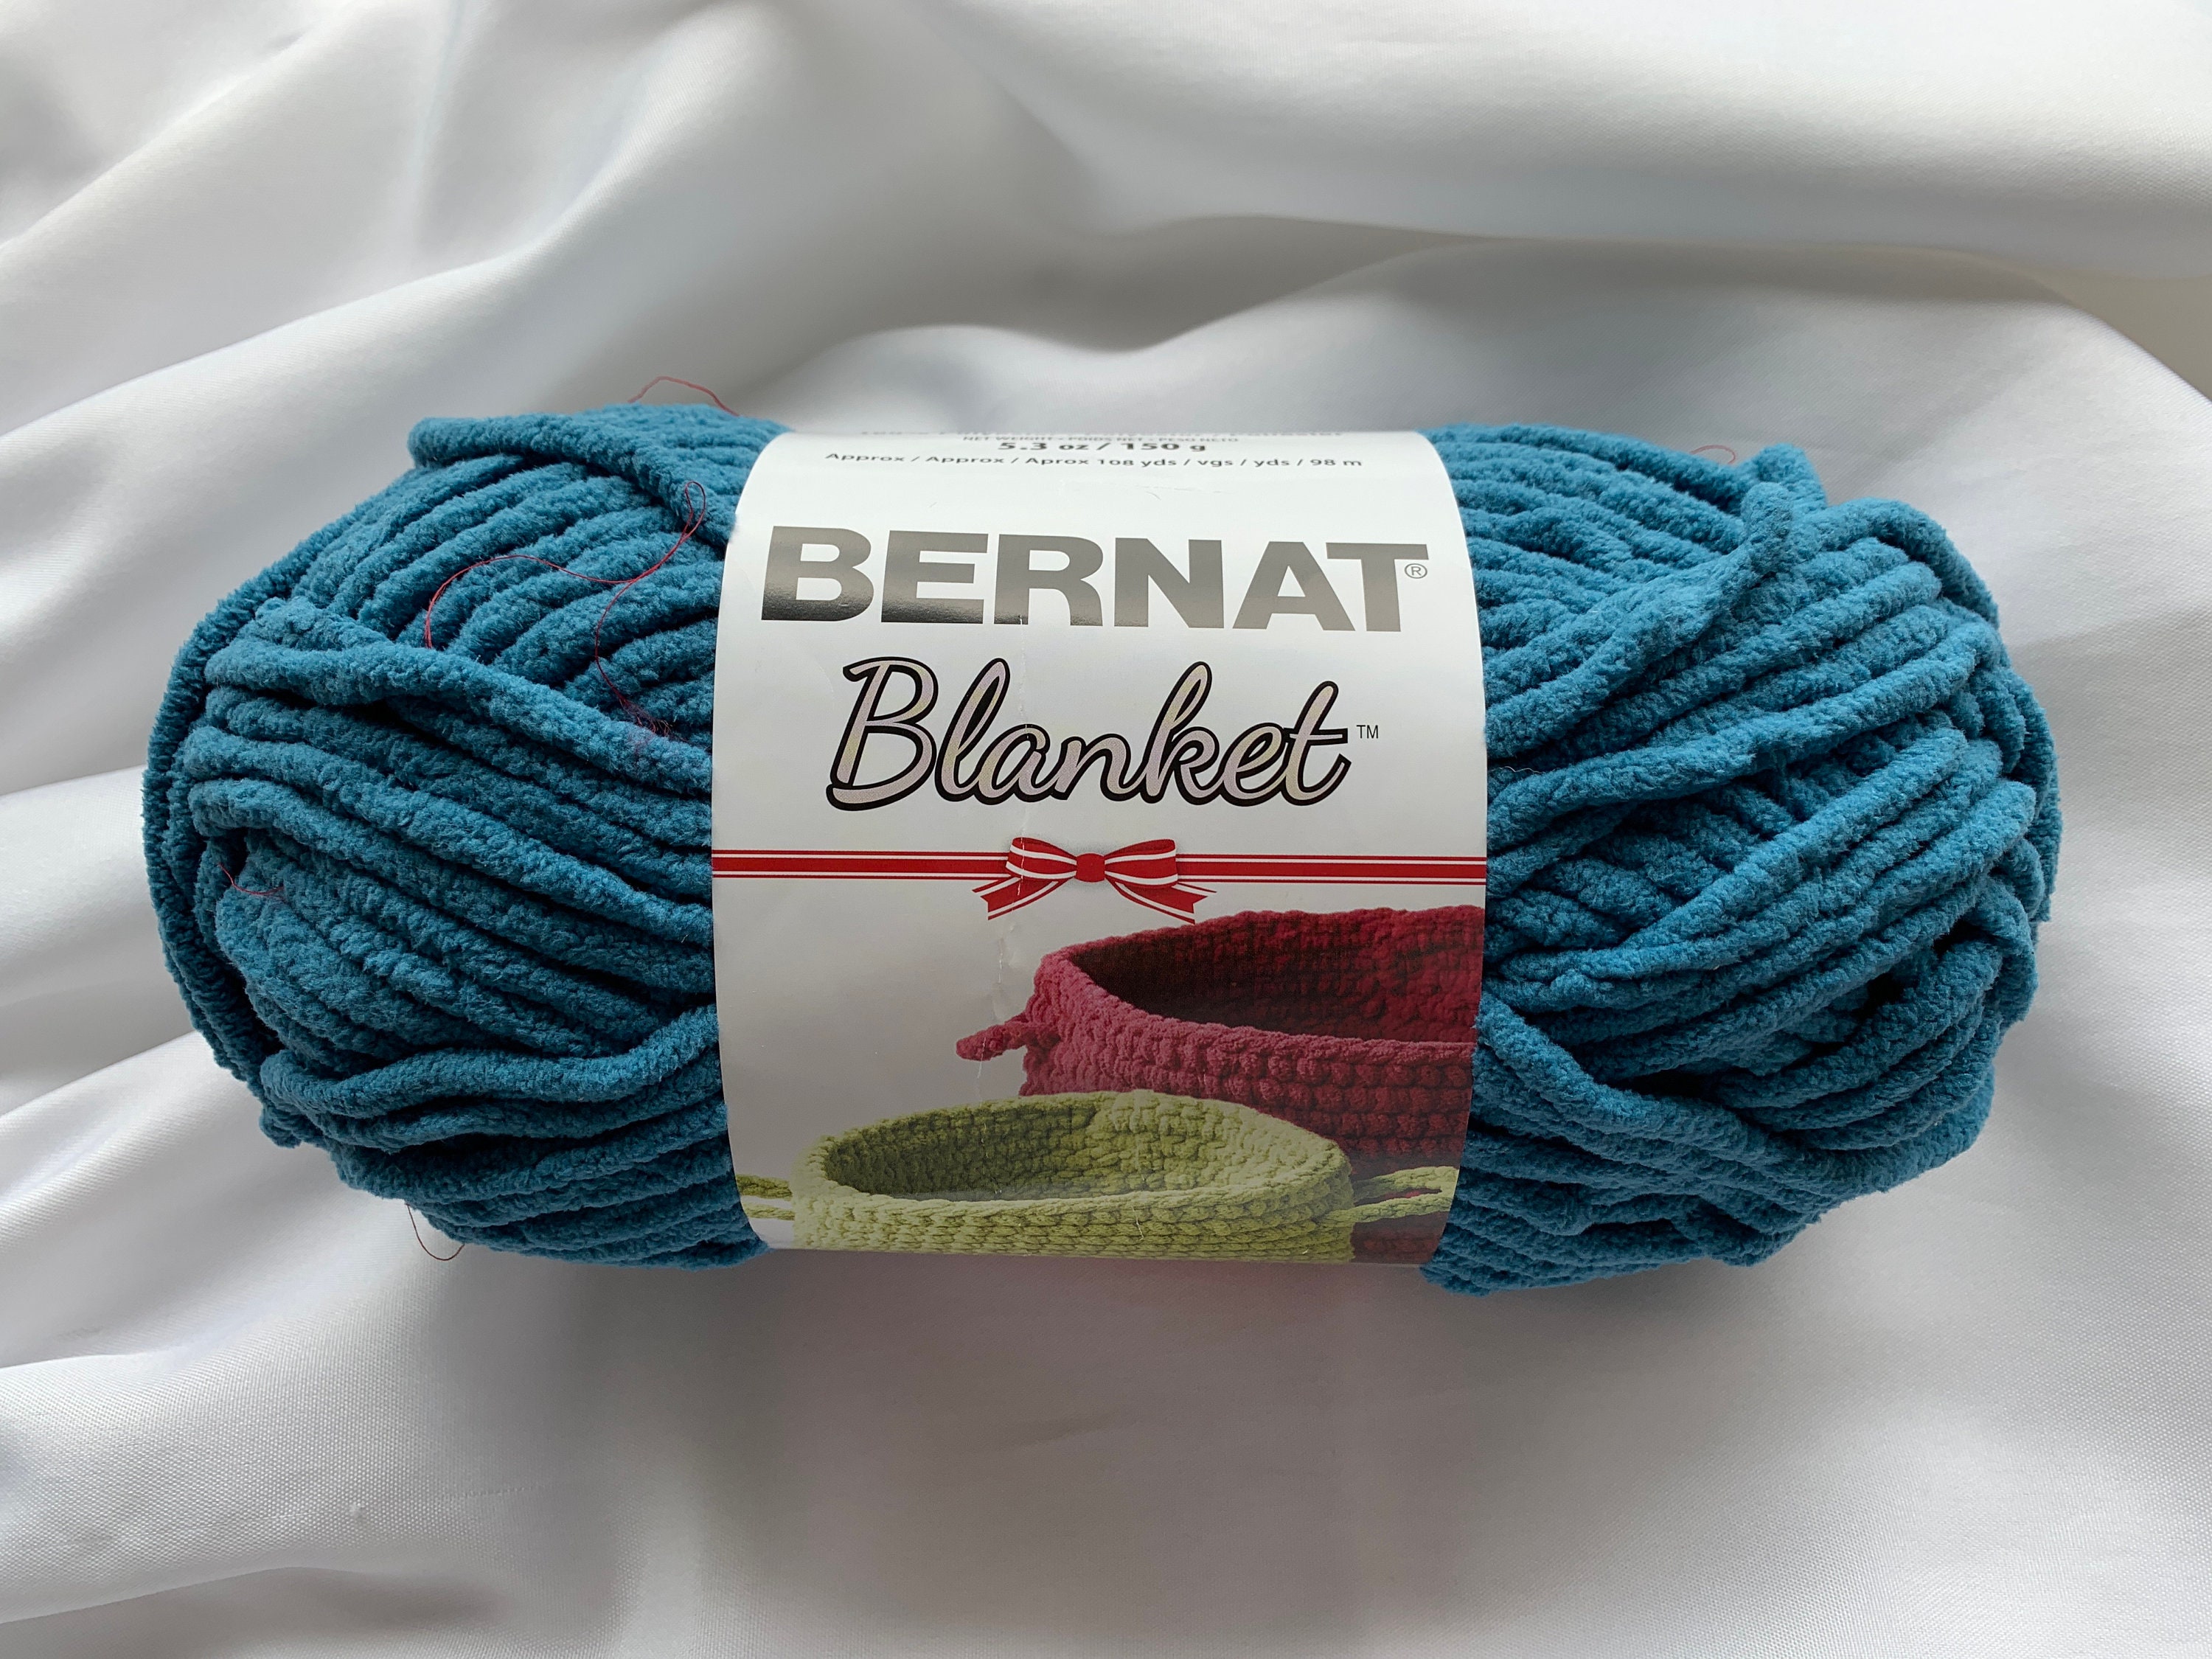  Bernat Blanket Yarn - Big Ball (10.5 oz) - 2 Pack with Pattern  Cards in Color (Tidepool)